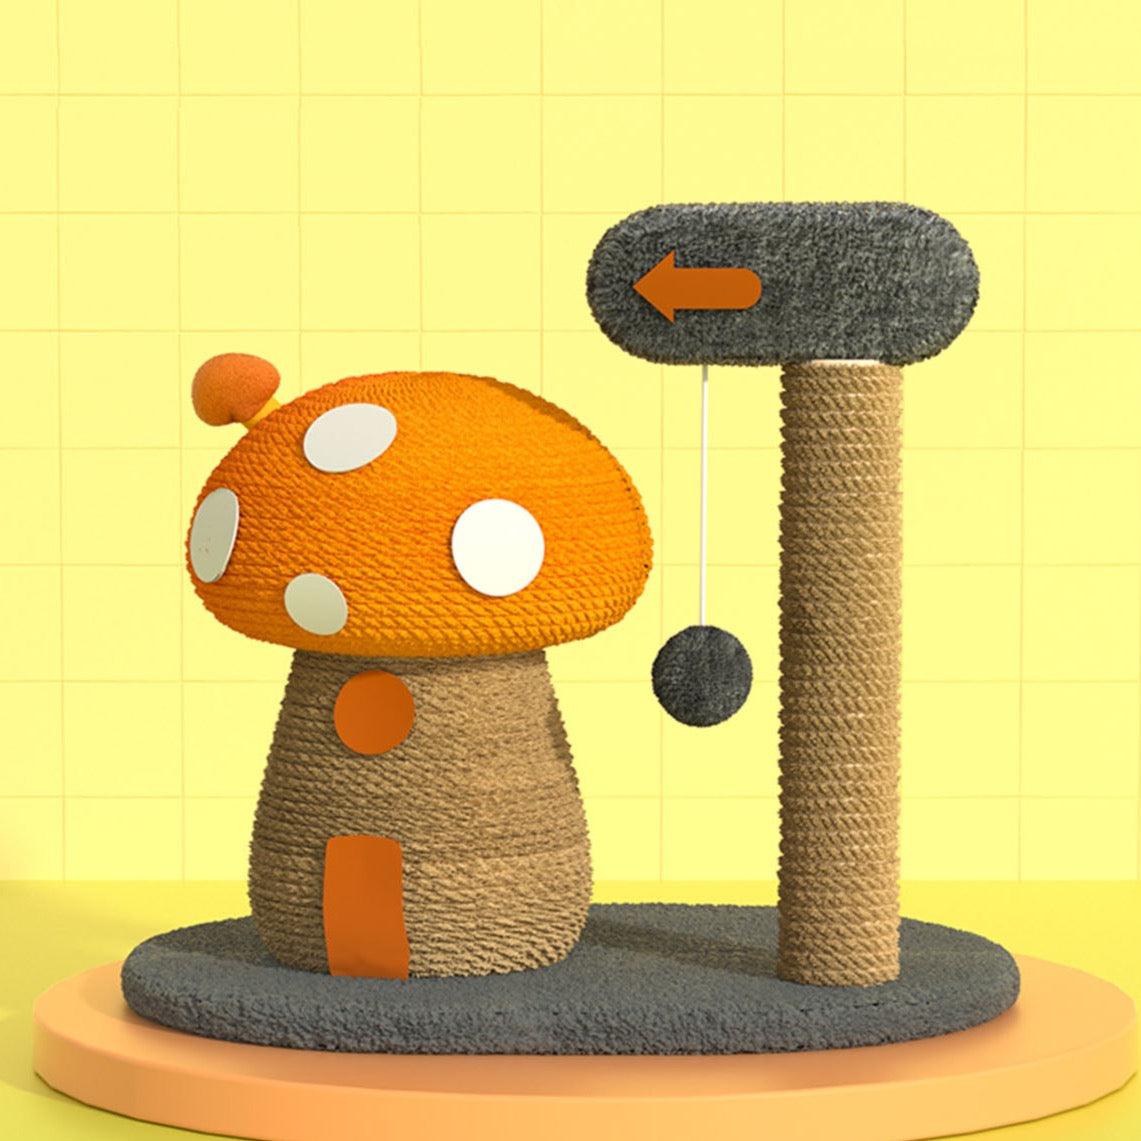 Flo's Mushroom House, Cat Toy, Hemp Rope-Weilai concept-Weilai concept